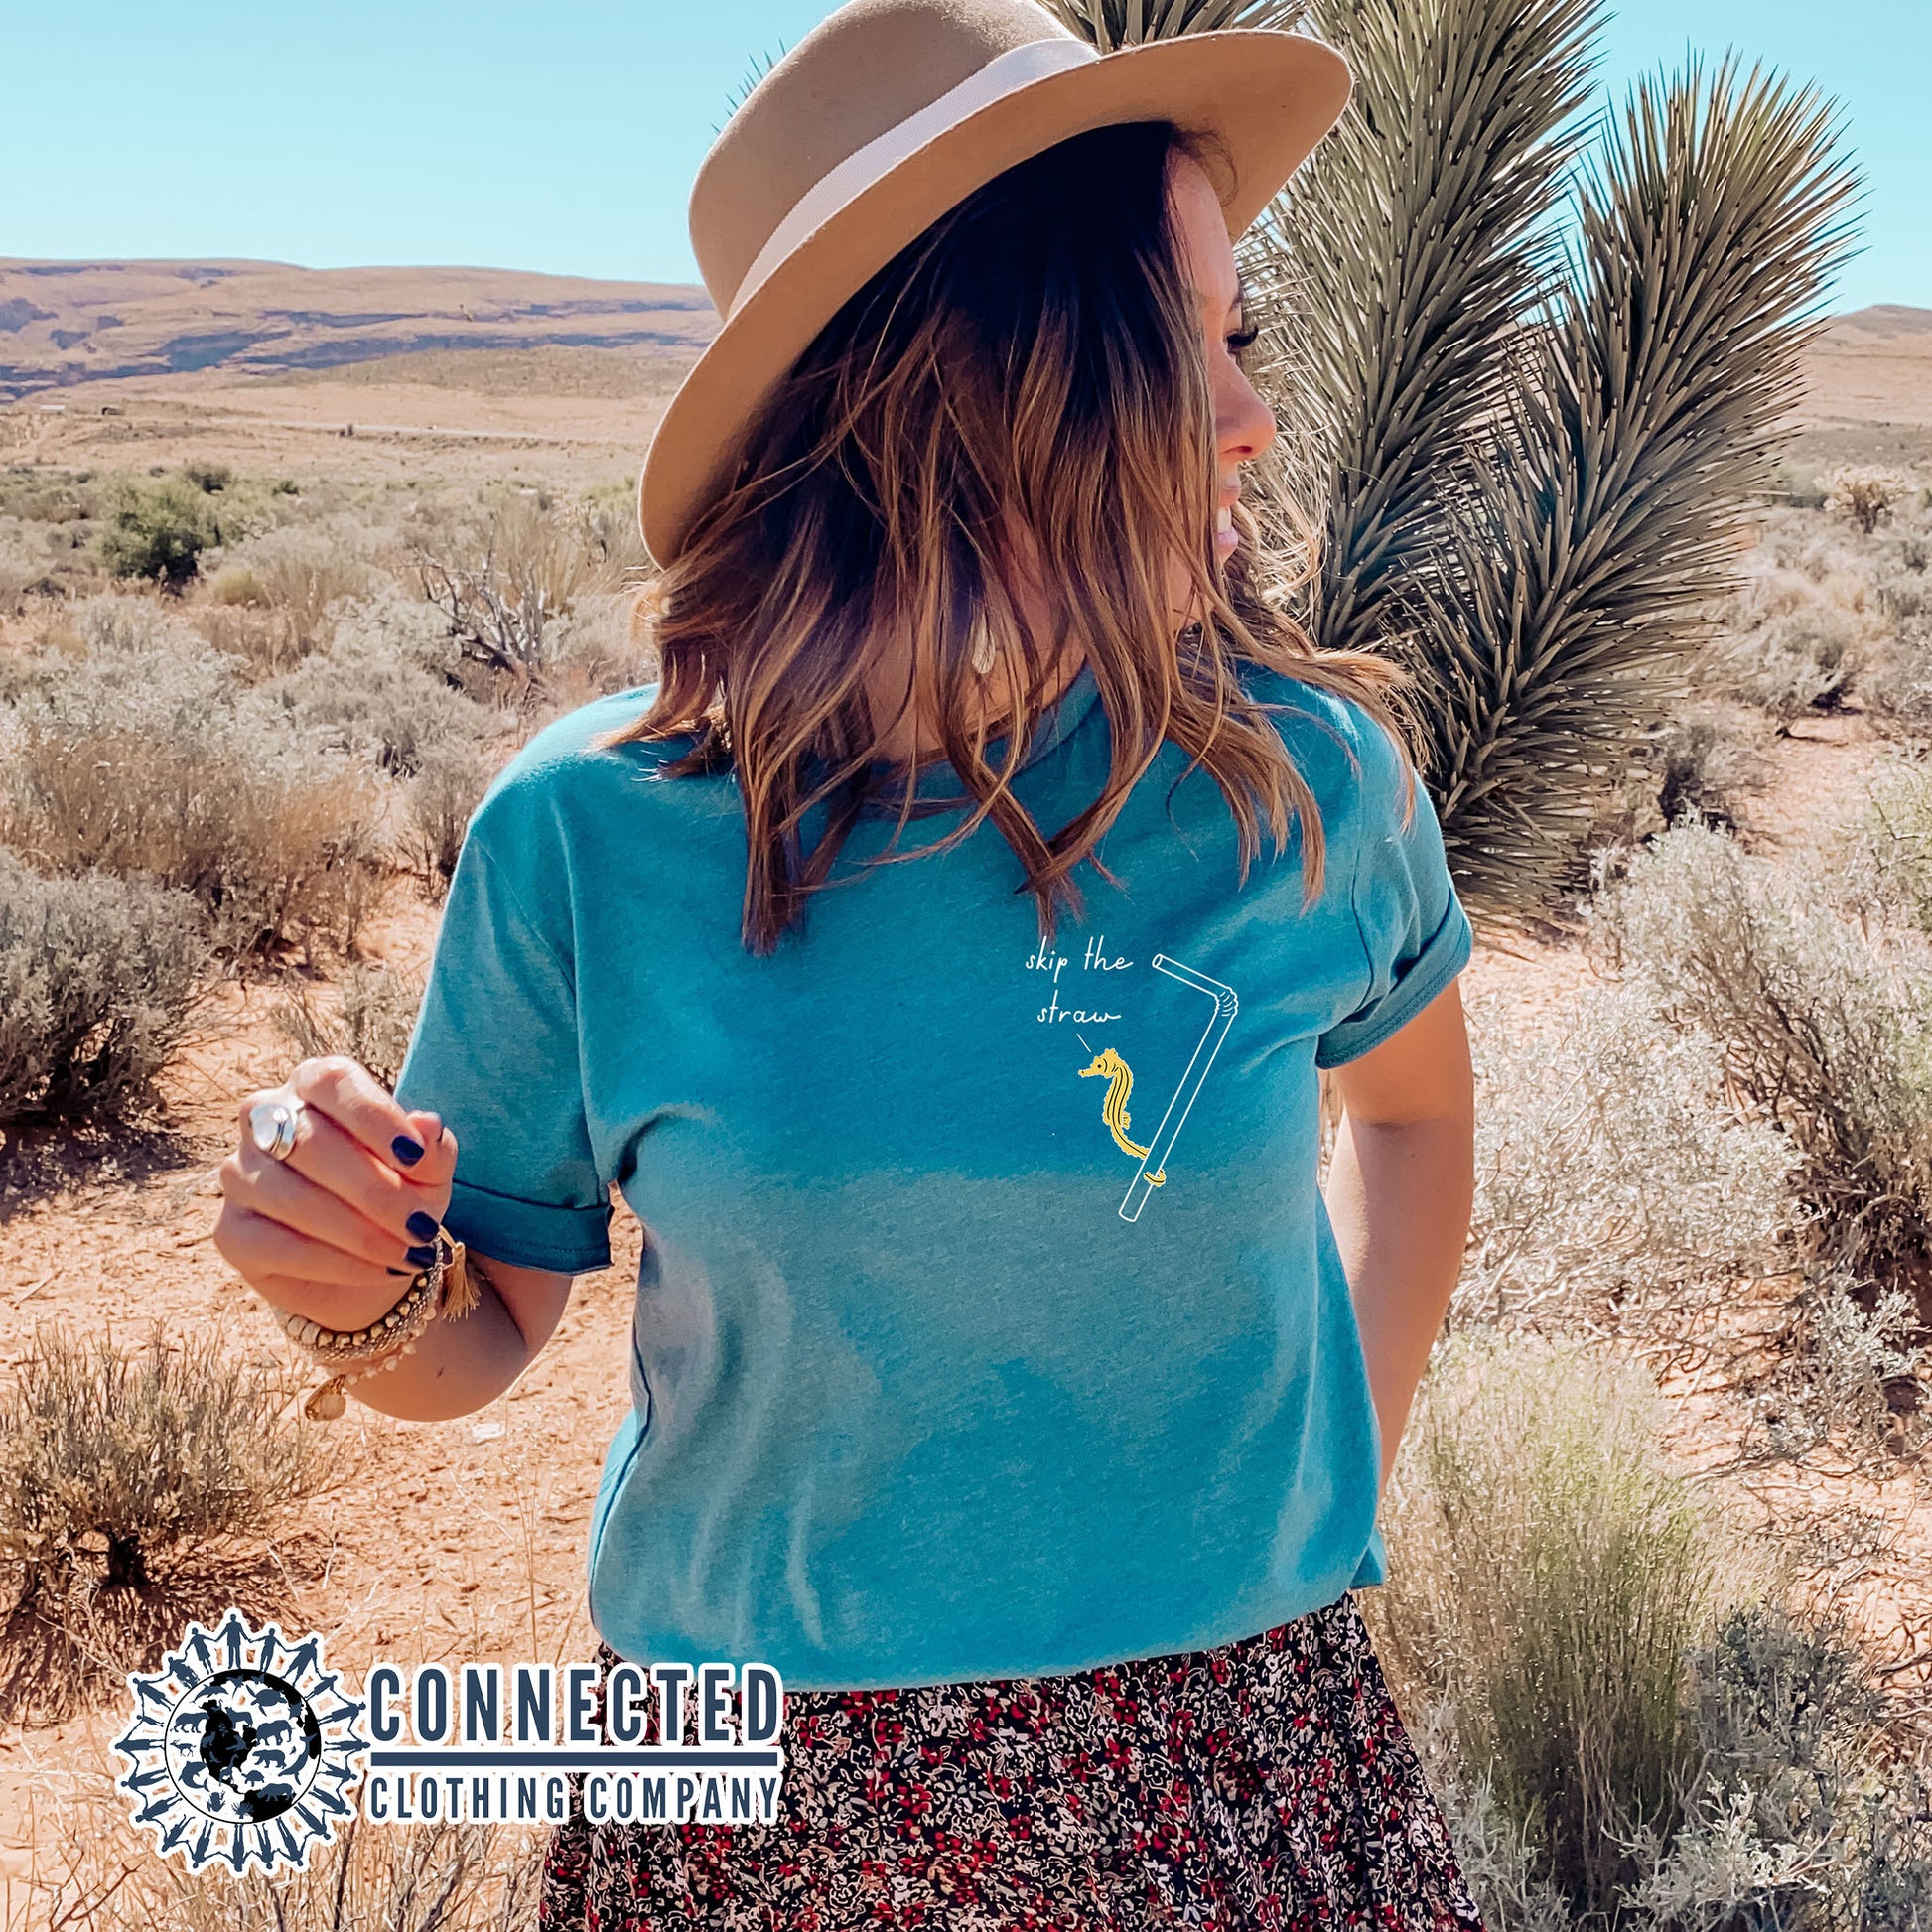 Aqua Skip The Straw Seahorse Tee (Seahorse holding onto straw while saying skip the straw) - Connected Clothing Company - Ethically and Sustainably Made - 10% donated to Mission Blue ocean conservation